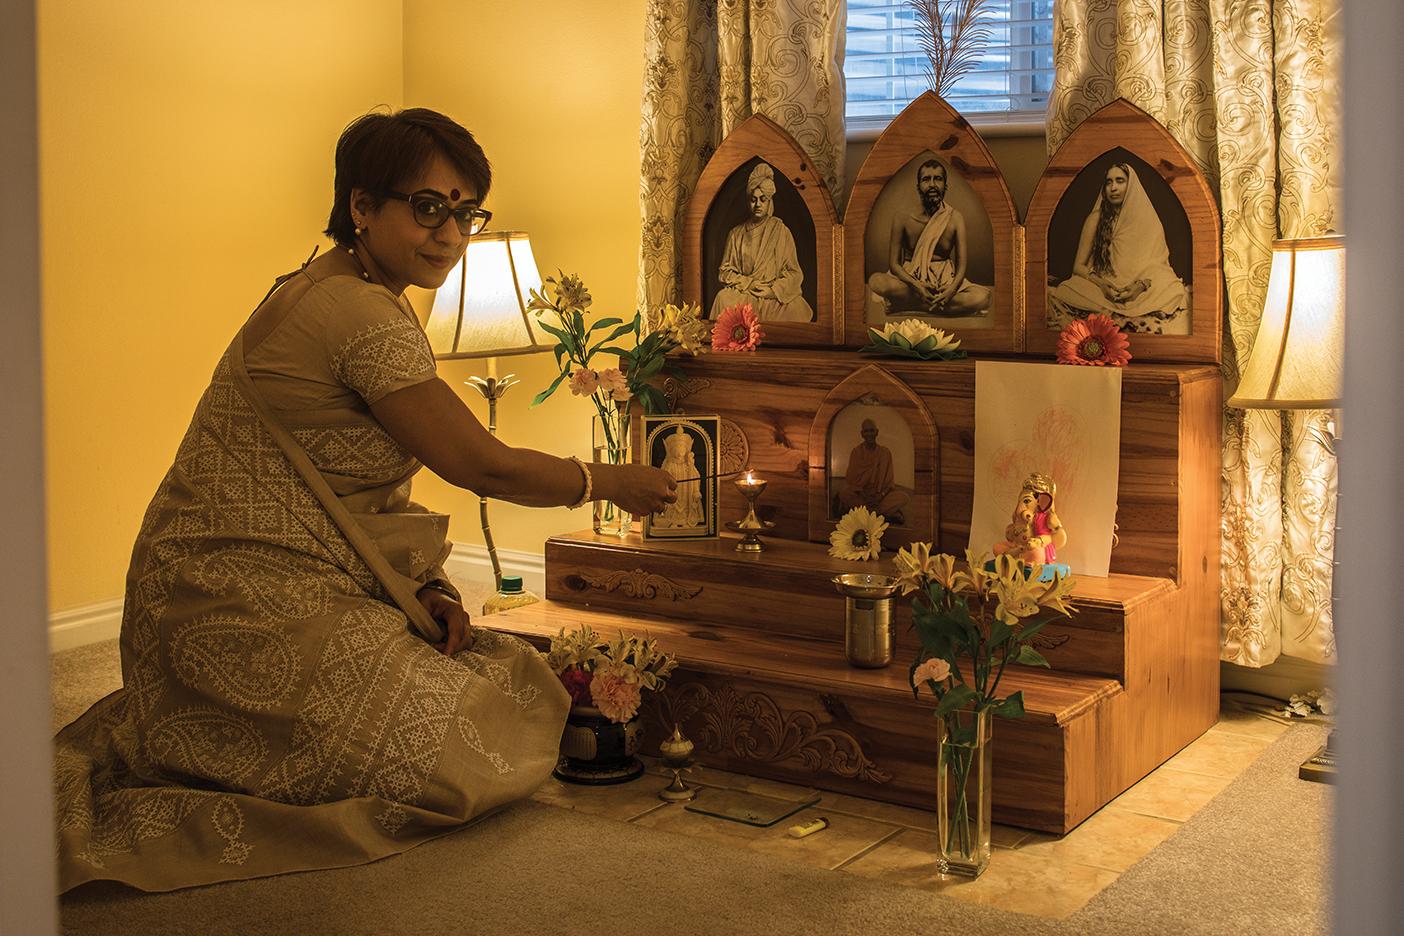 Pritha Lal, dressed in traditional Hindu clothing kneels in front of a family shrine in her home that displays pictures of family members